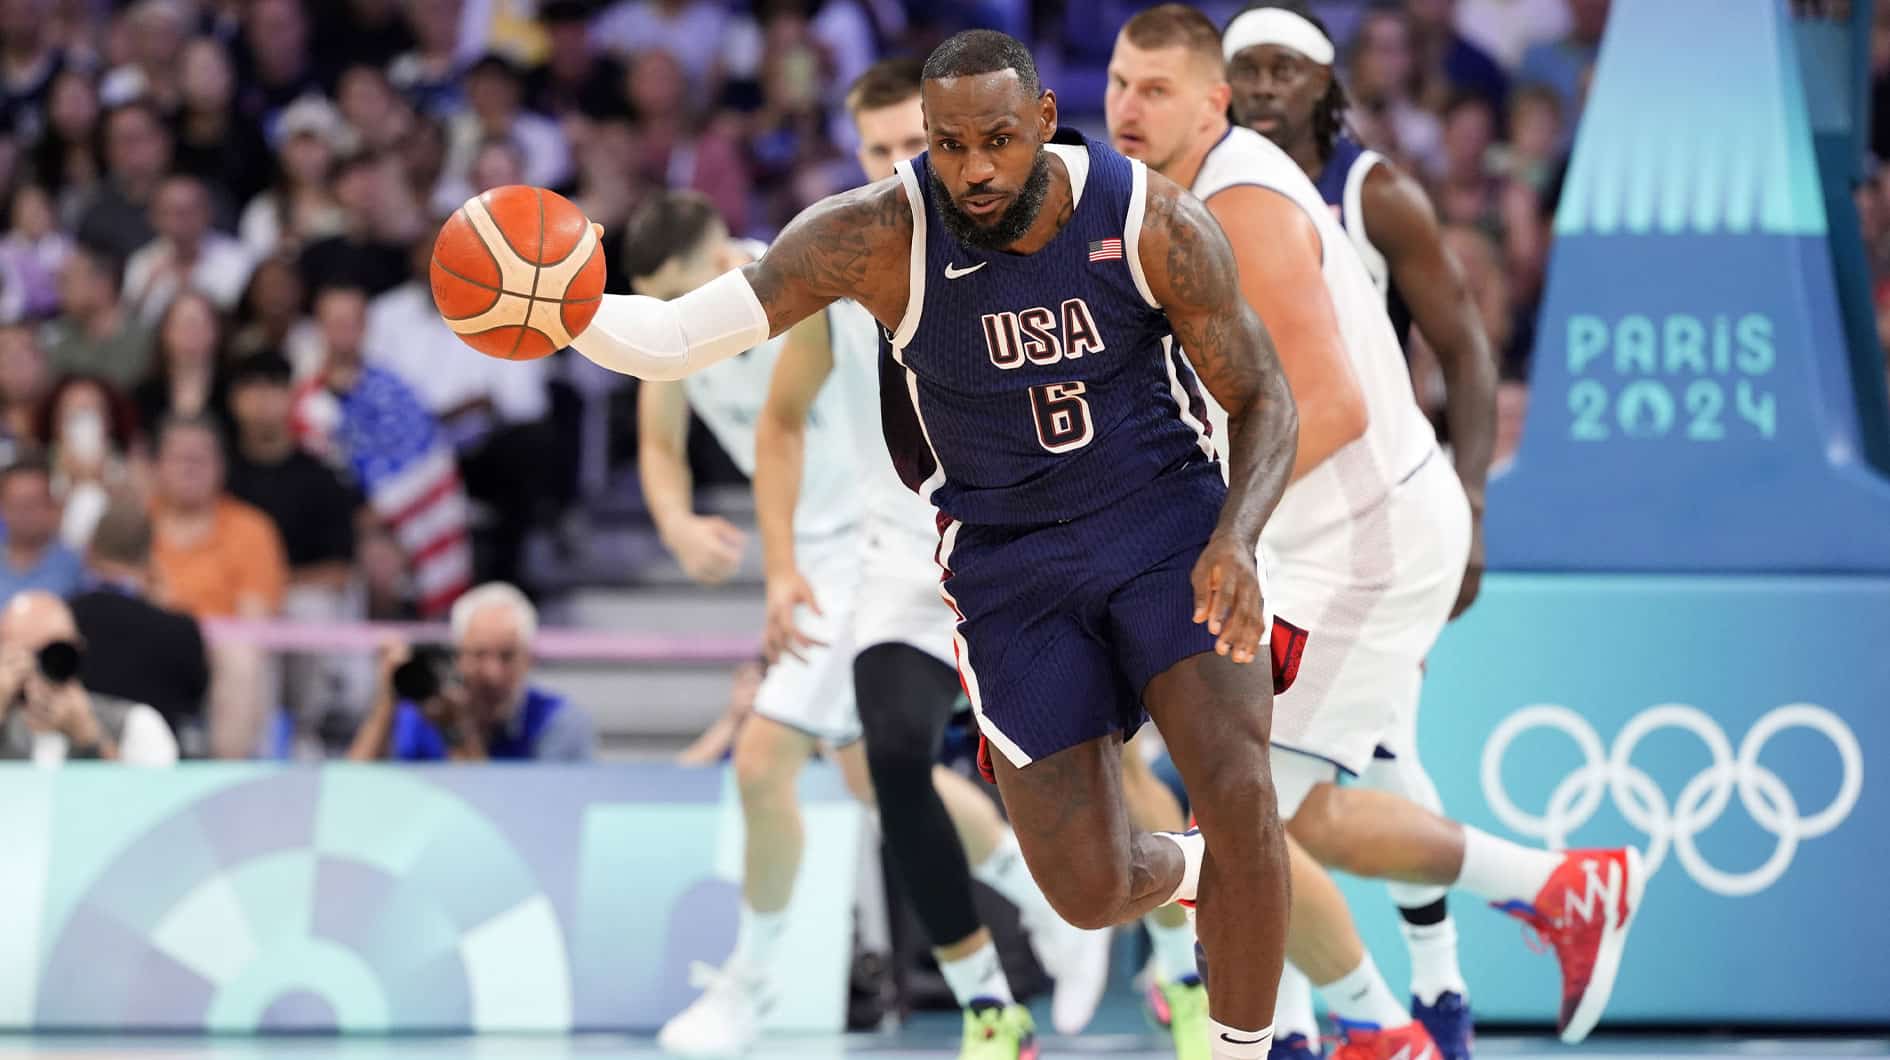 LeBron James, one of the greatest athletes ever, on Team USA during 2024 Paris Olympics